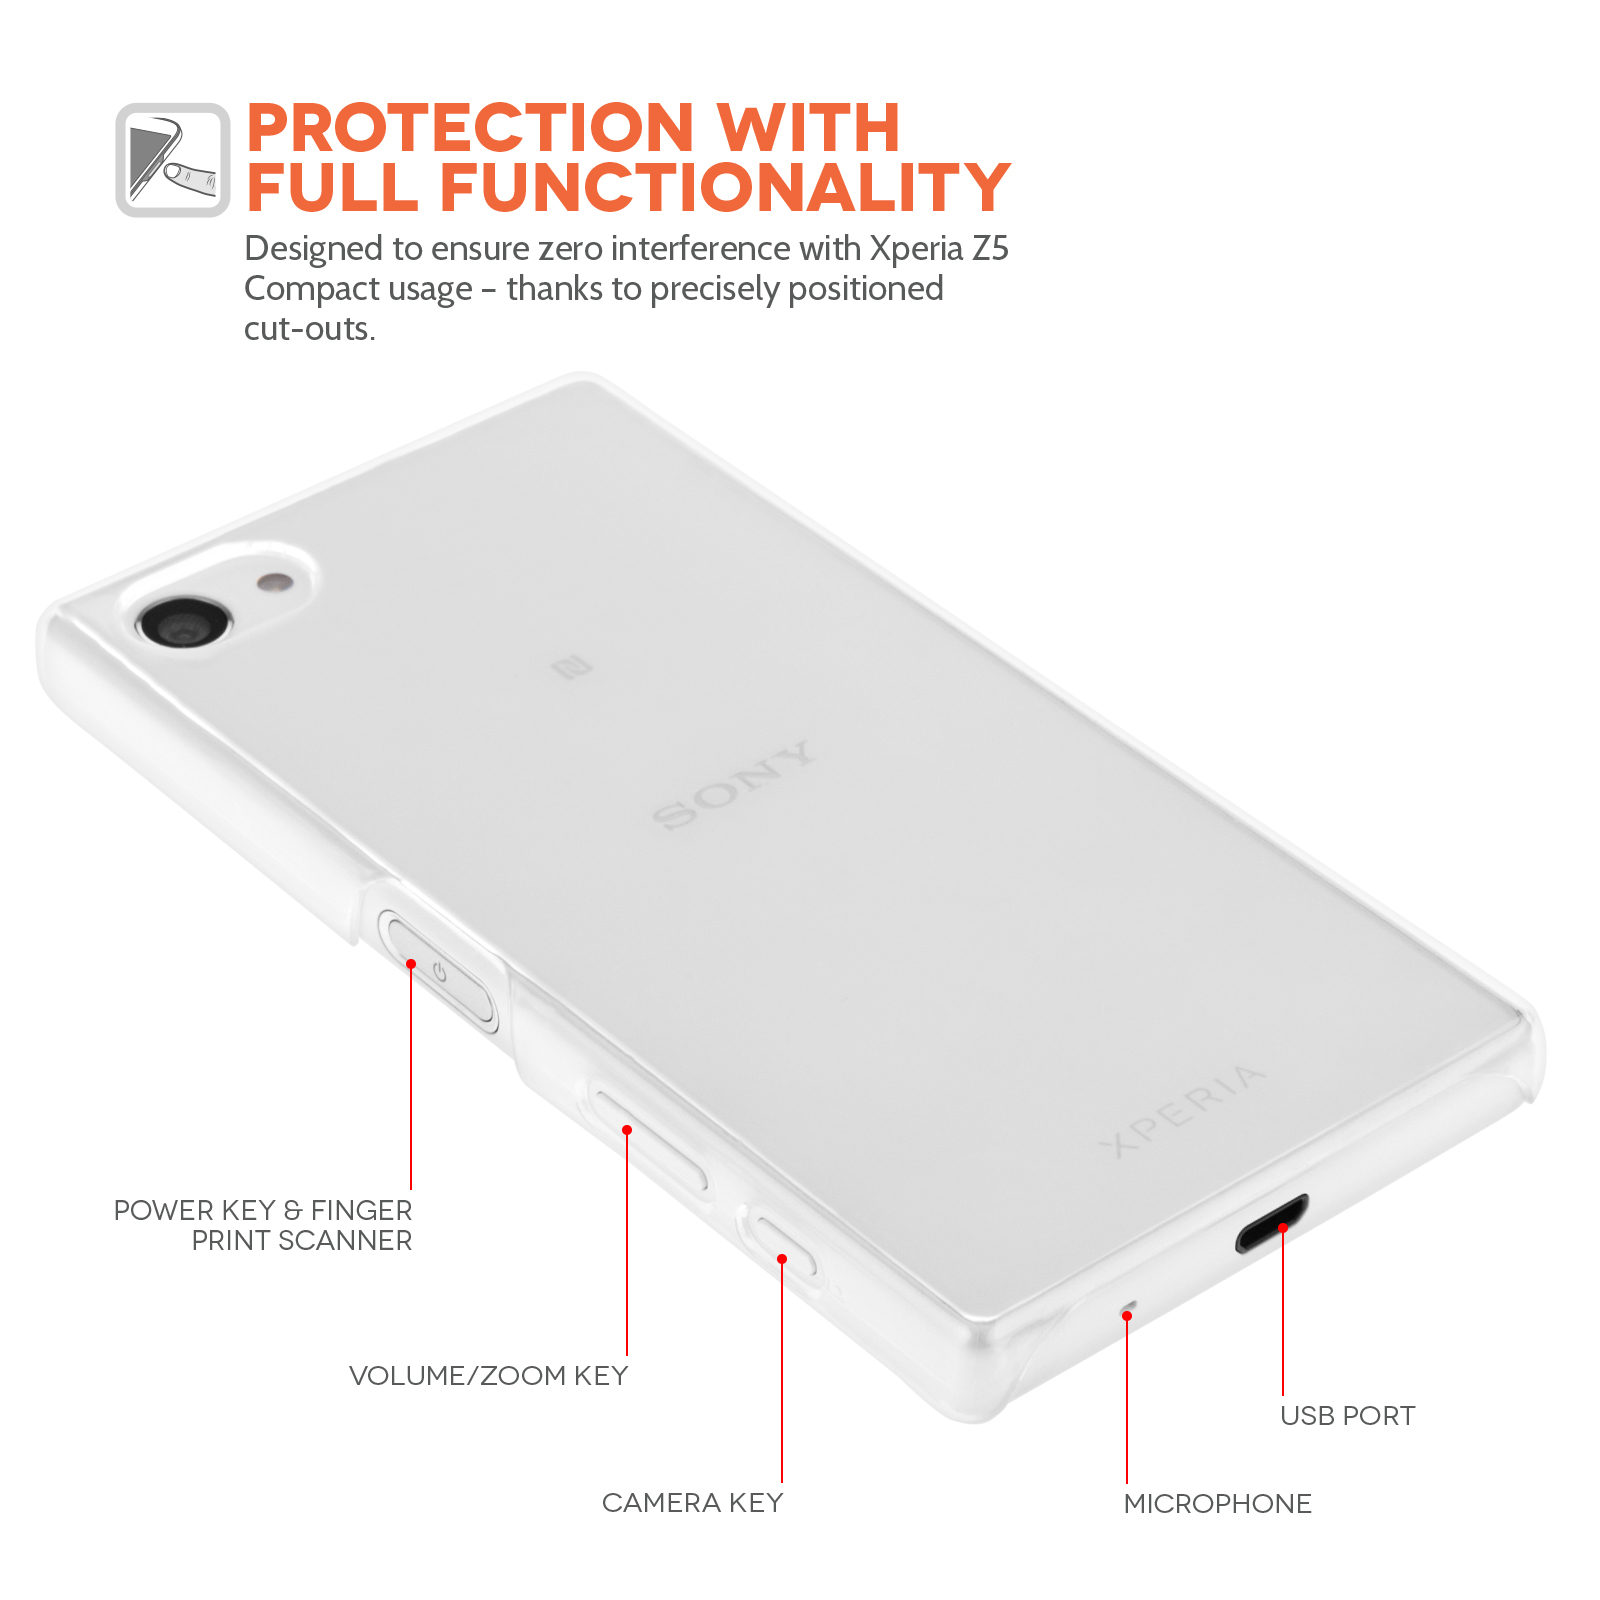 YouSave Accessories Sony Xperia Z5 Compact Hard Case - Crystal Clear